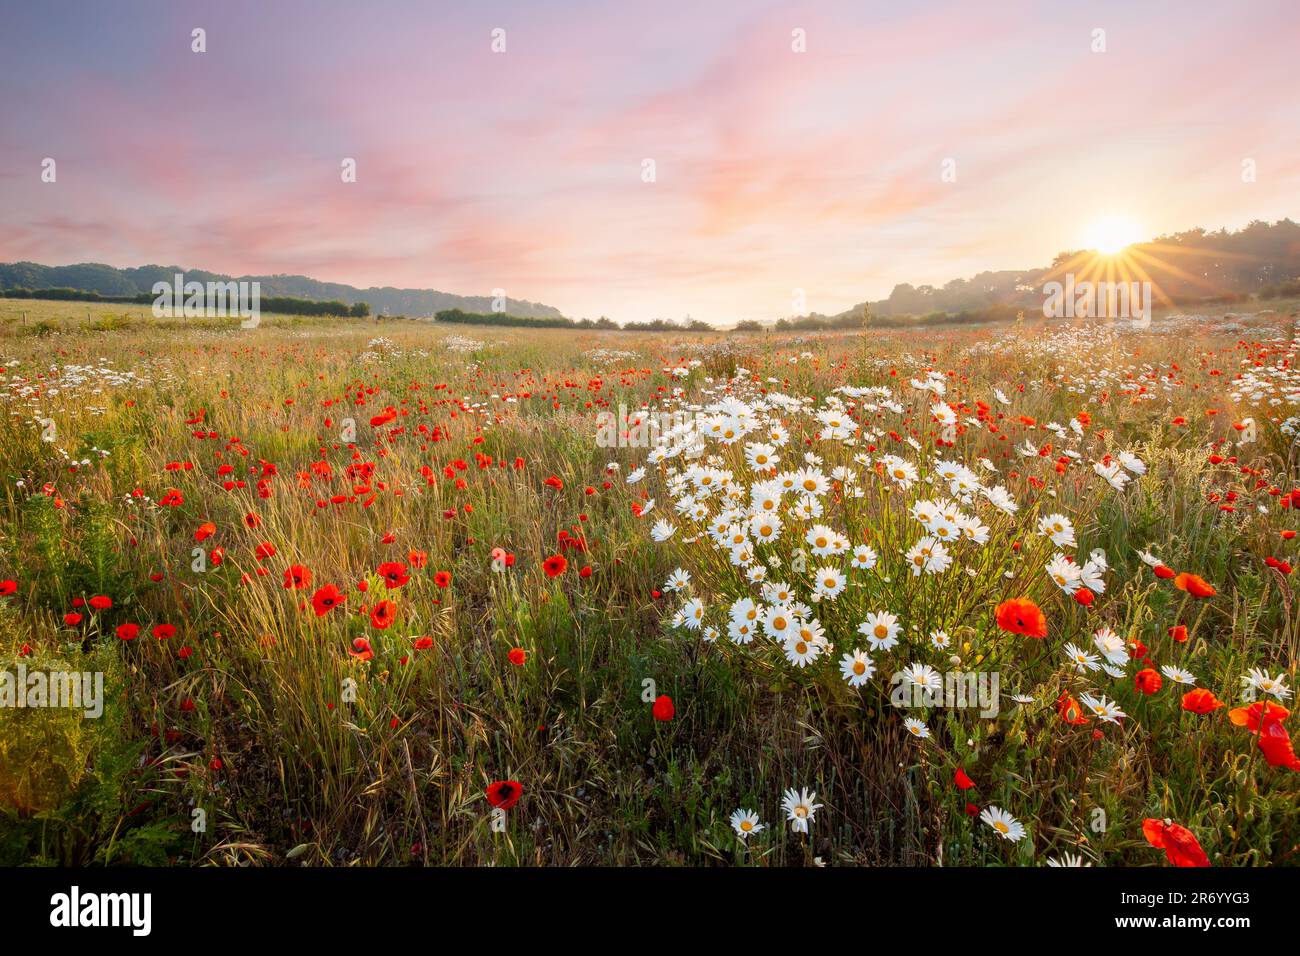 Wild flowers in a meadow with pink sky sunrise. Oxeye daisies and red poppies natural landscape in Norfolk England Stock Photo